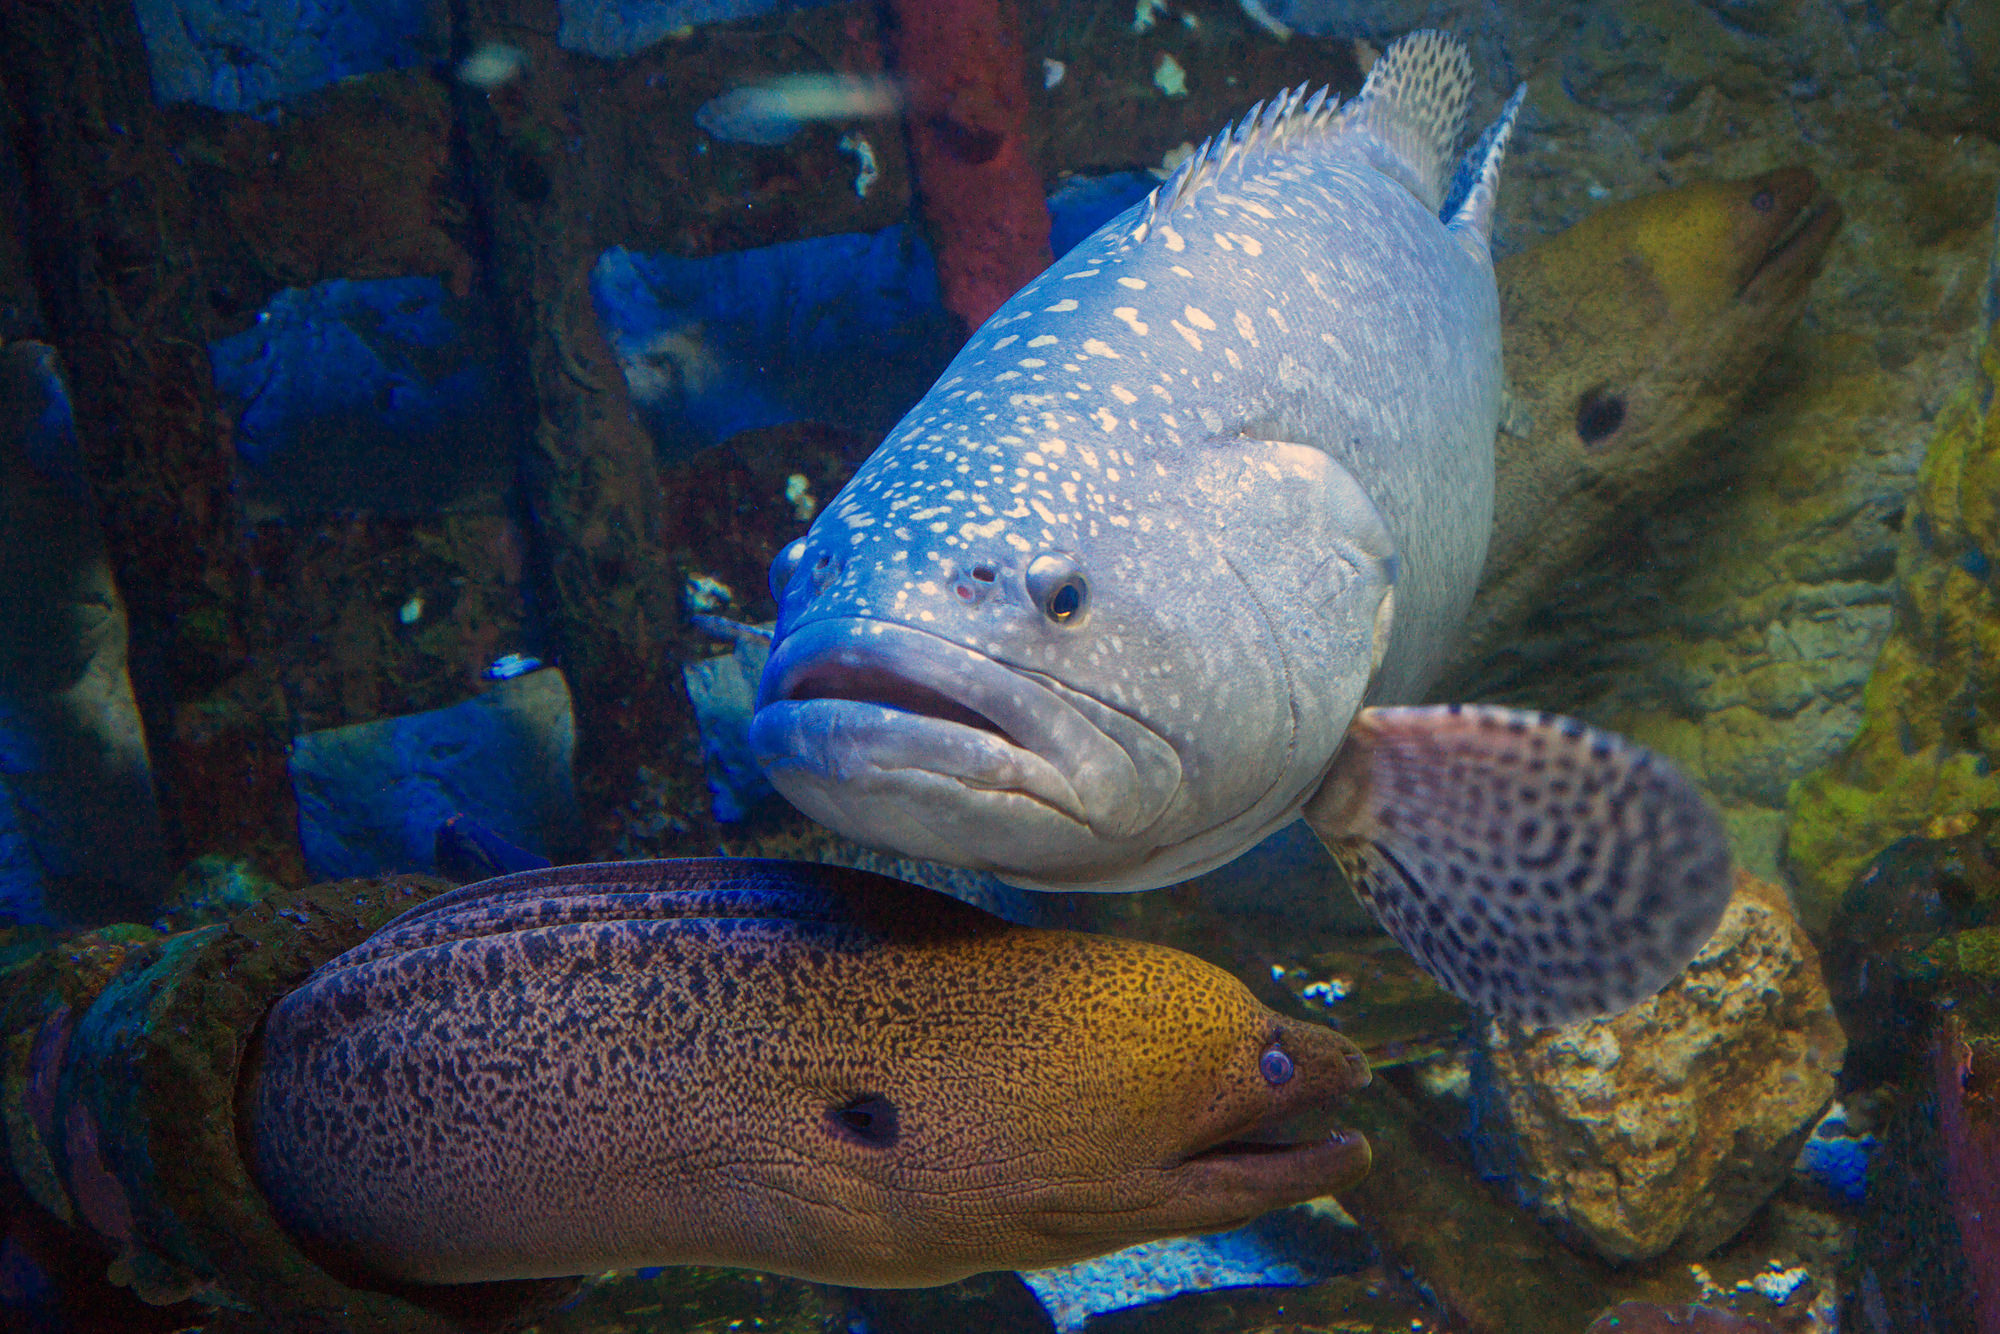 Moray Eel and Grouper fish hunting together 2000x1334.jpg